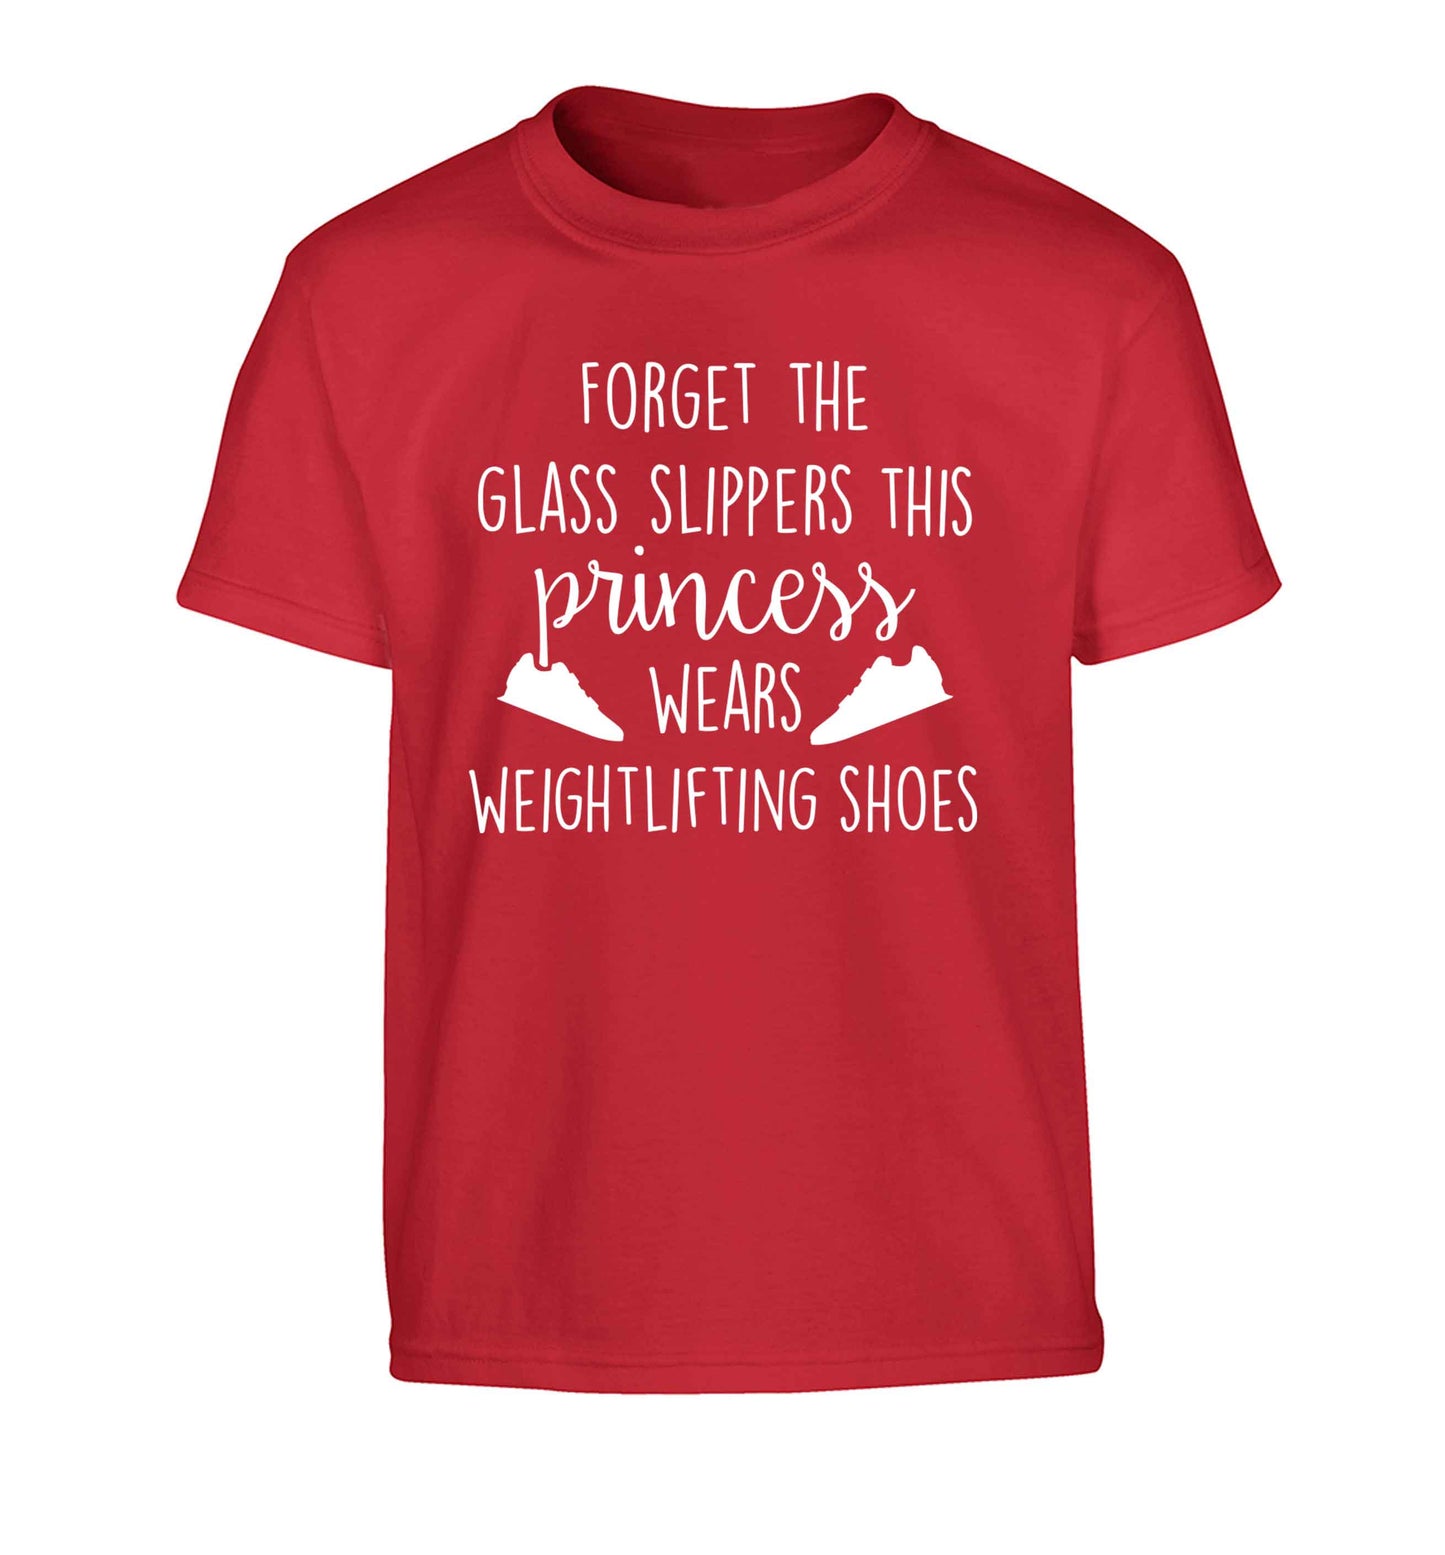 Forget the glass slippers this princess wears weightlifting shoes Children's red Tshirt 12-13 Years